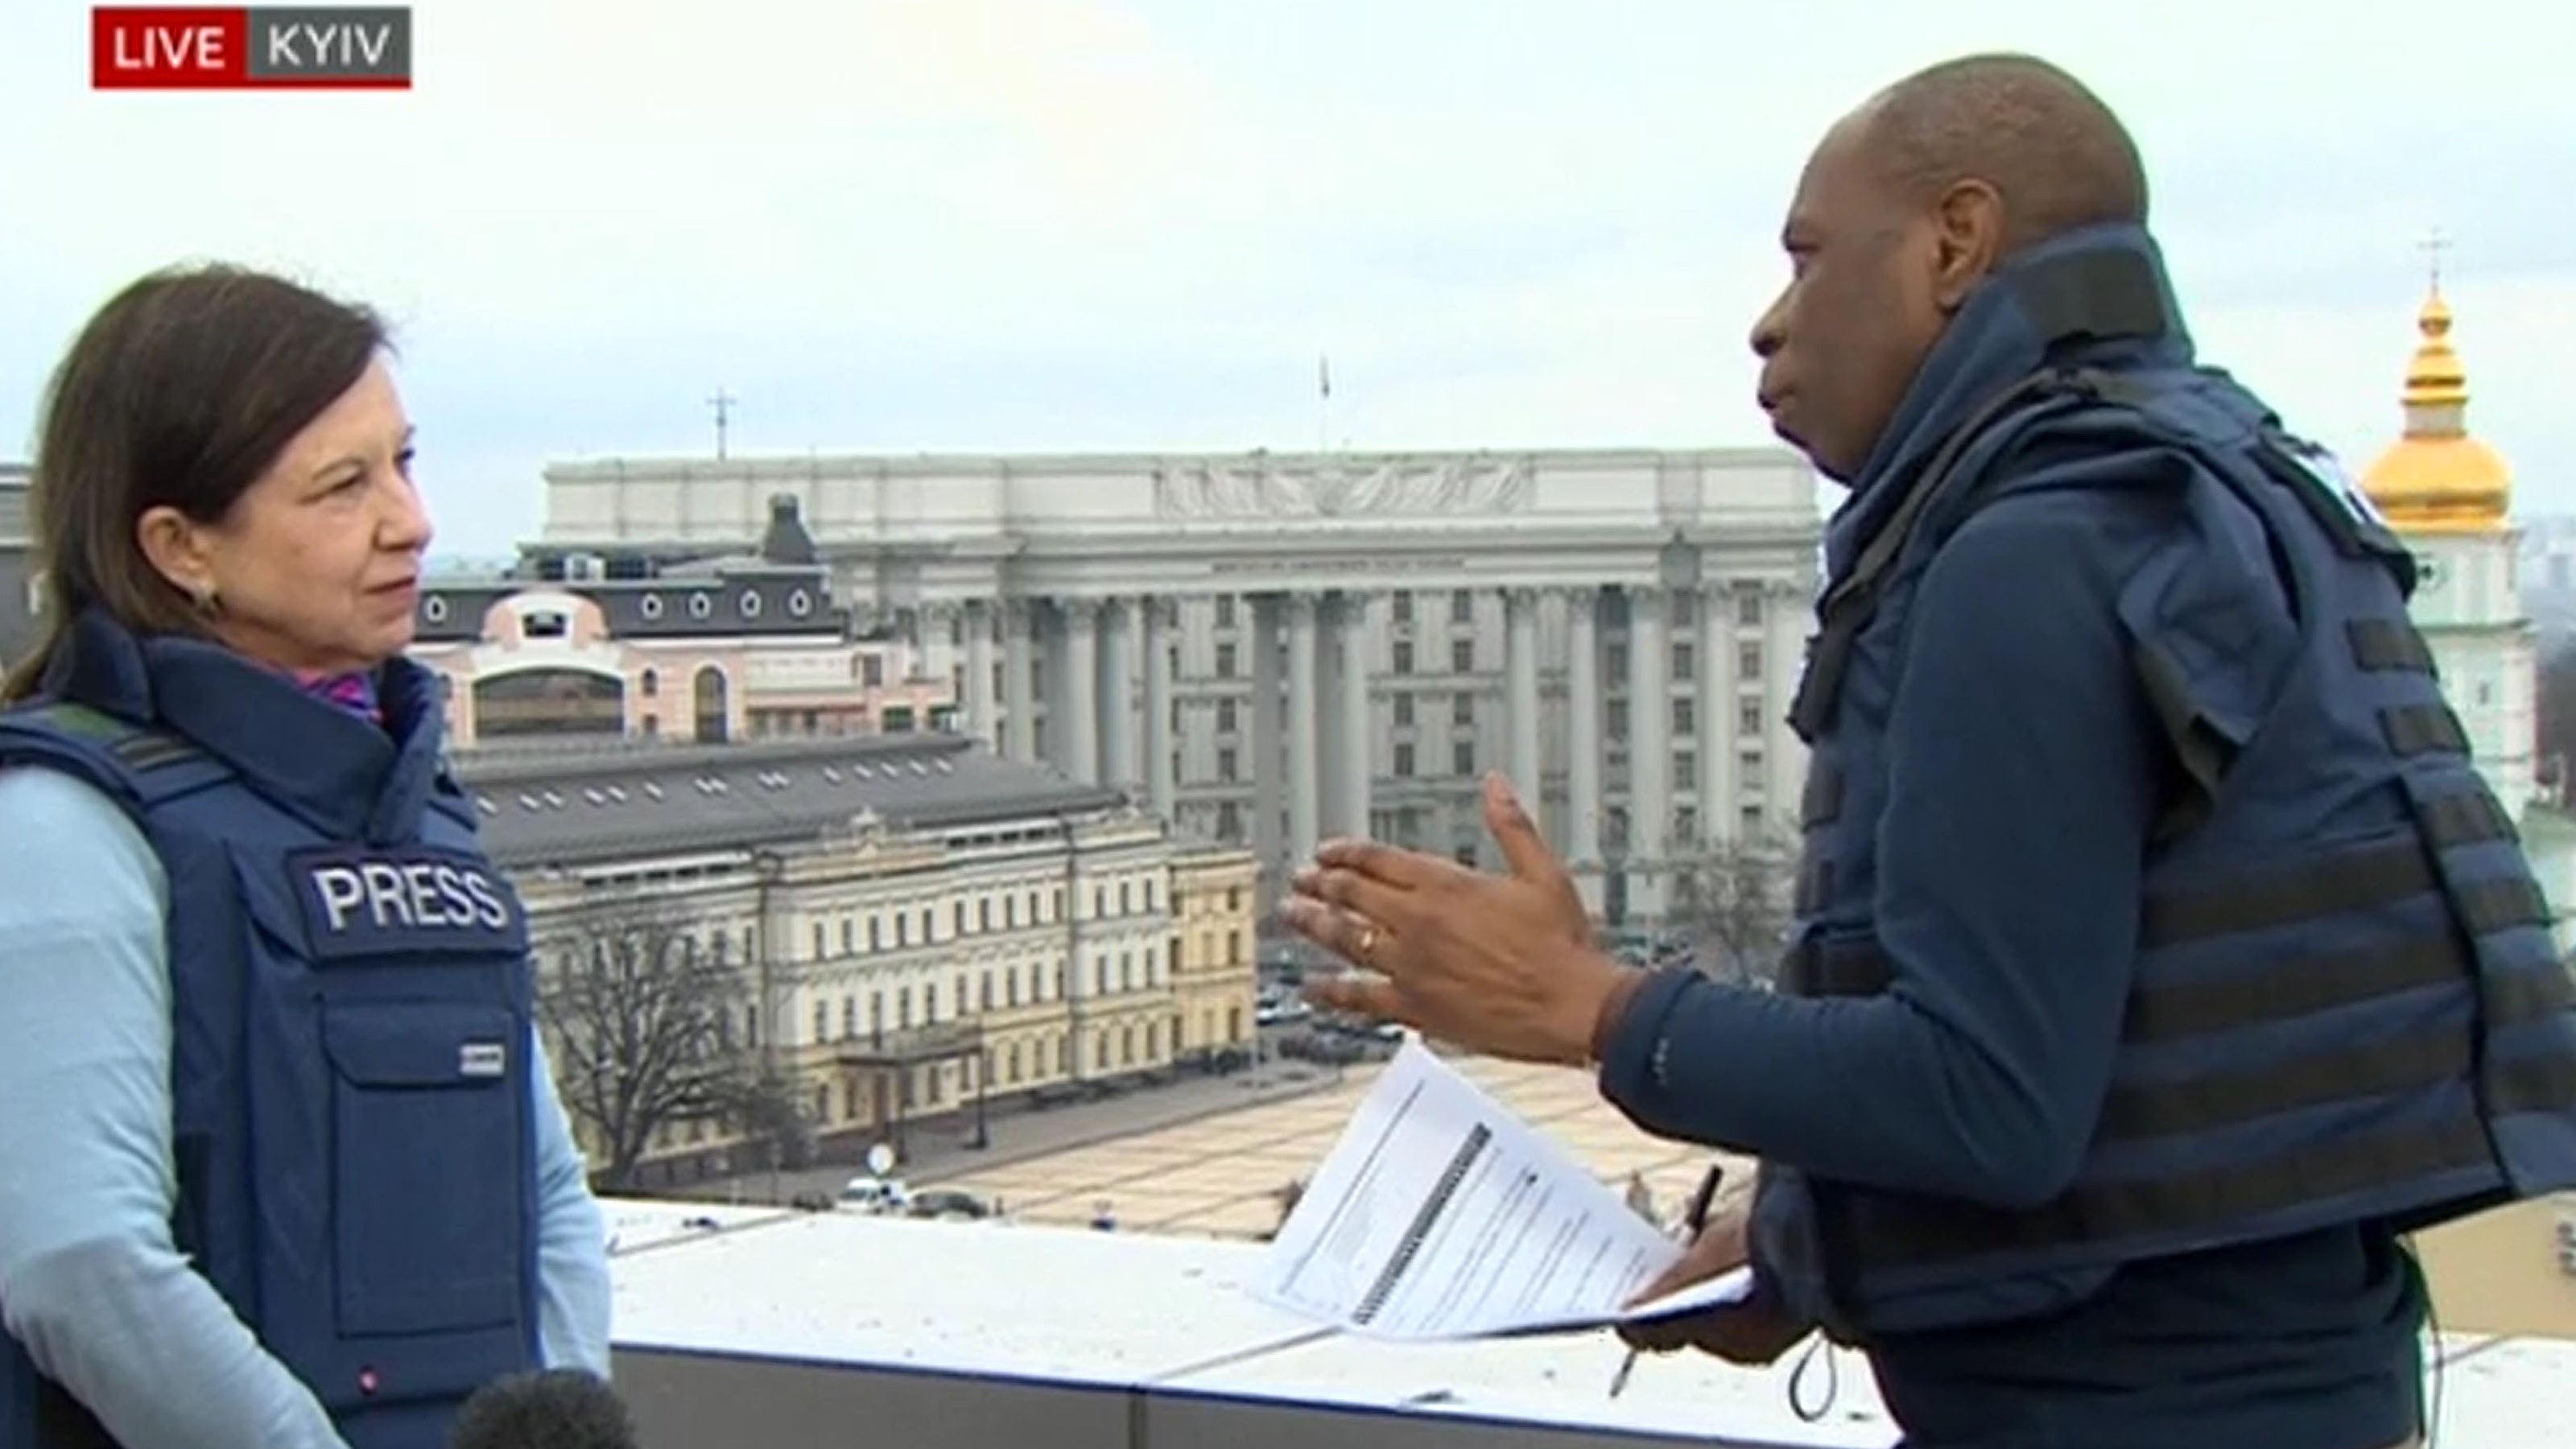 Lyse Doucet and Clive Myrie in Kyiv wearing flak jackets (Videograb/BBC/PA)